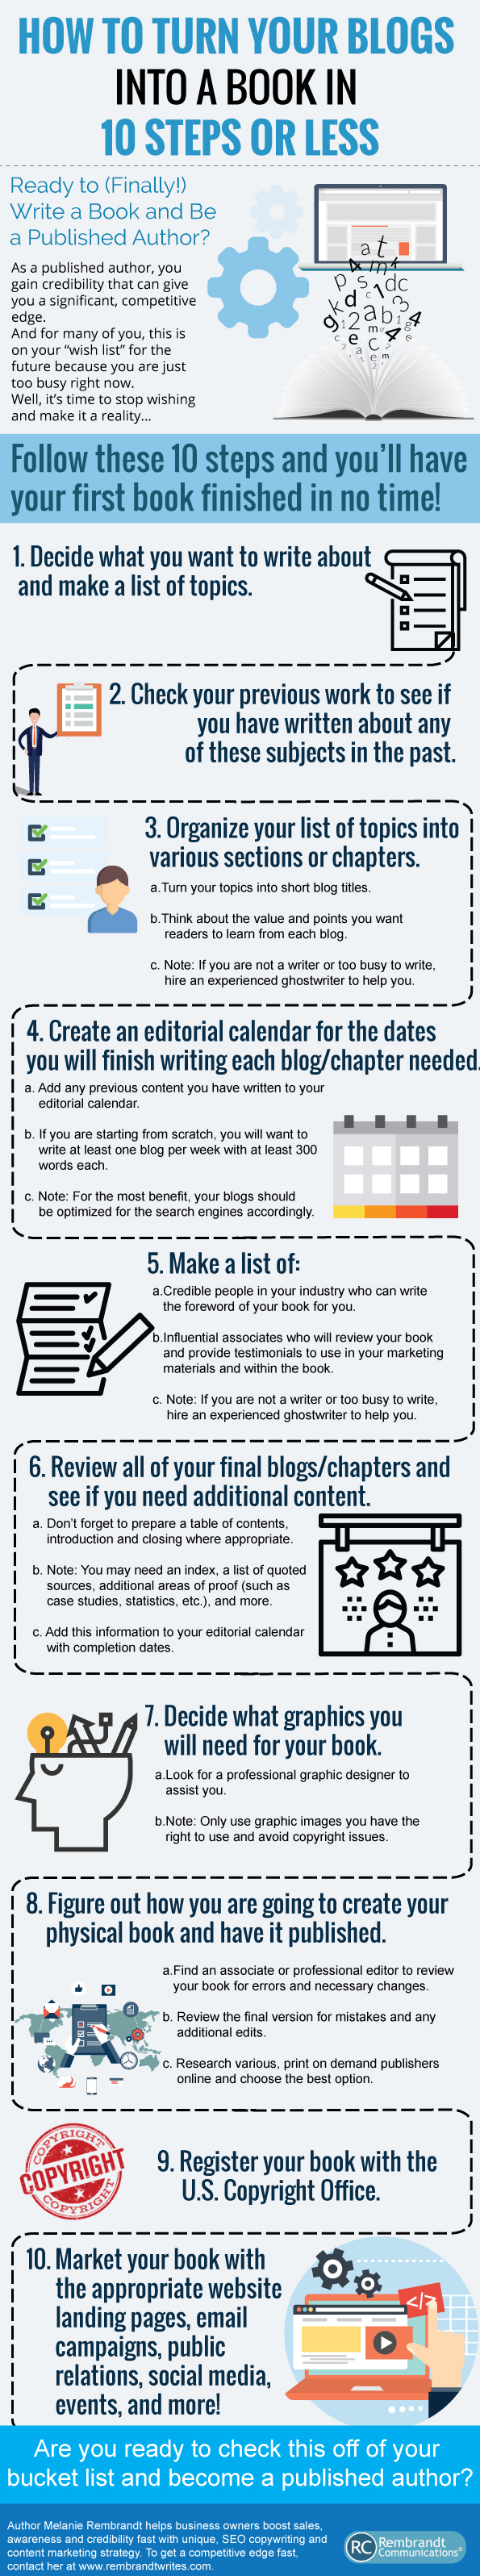 How to Turn Blogs Into Books by Melanie Rembrandt